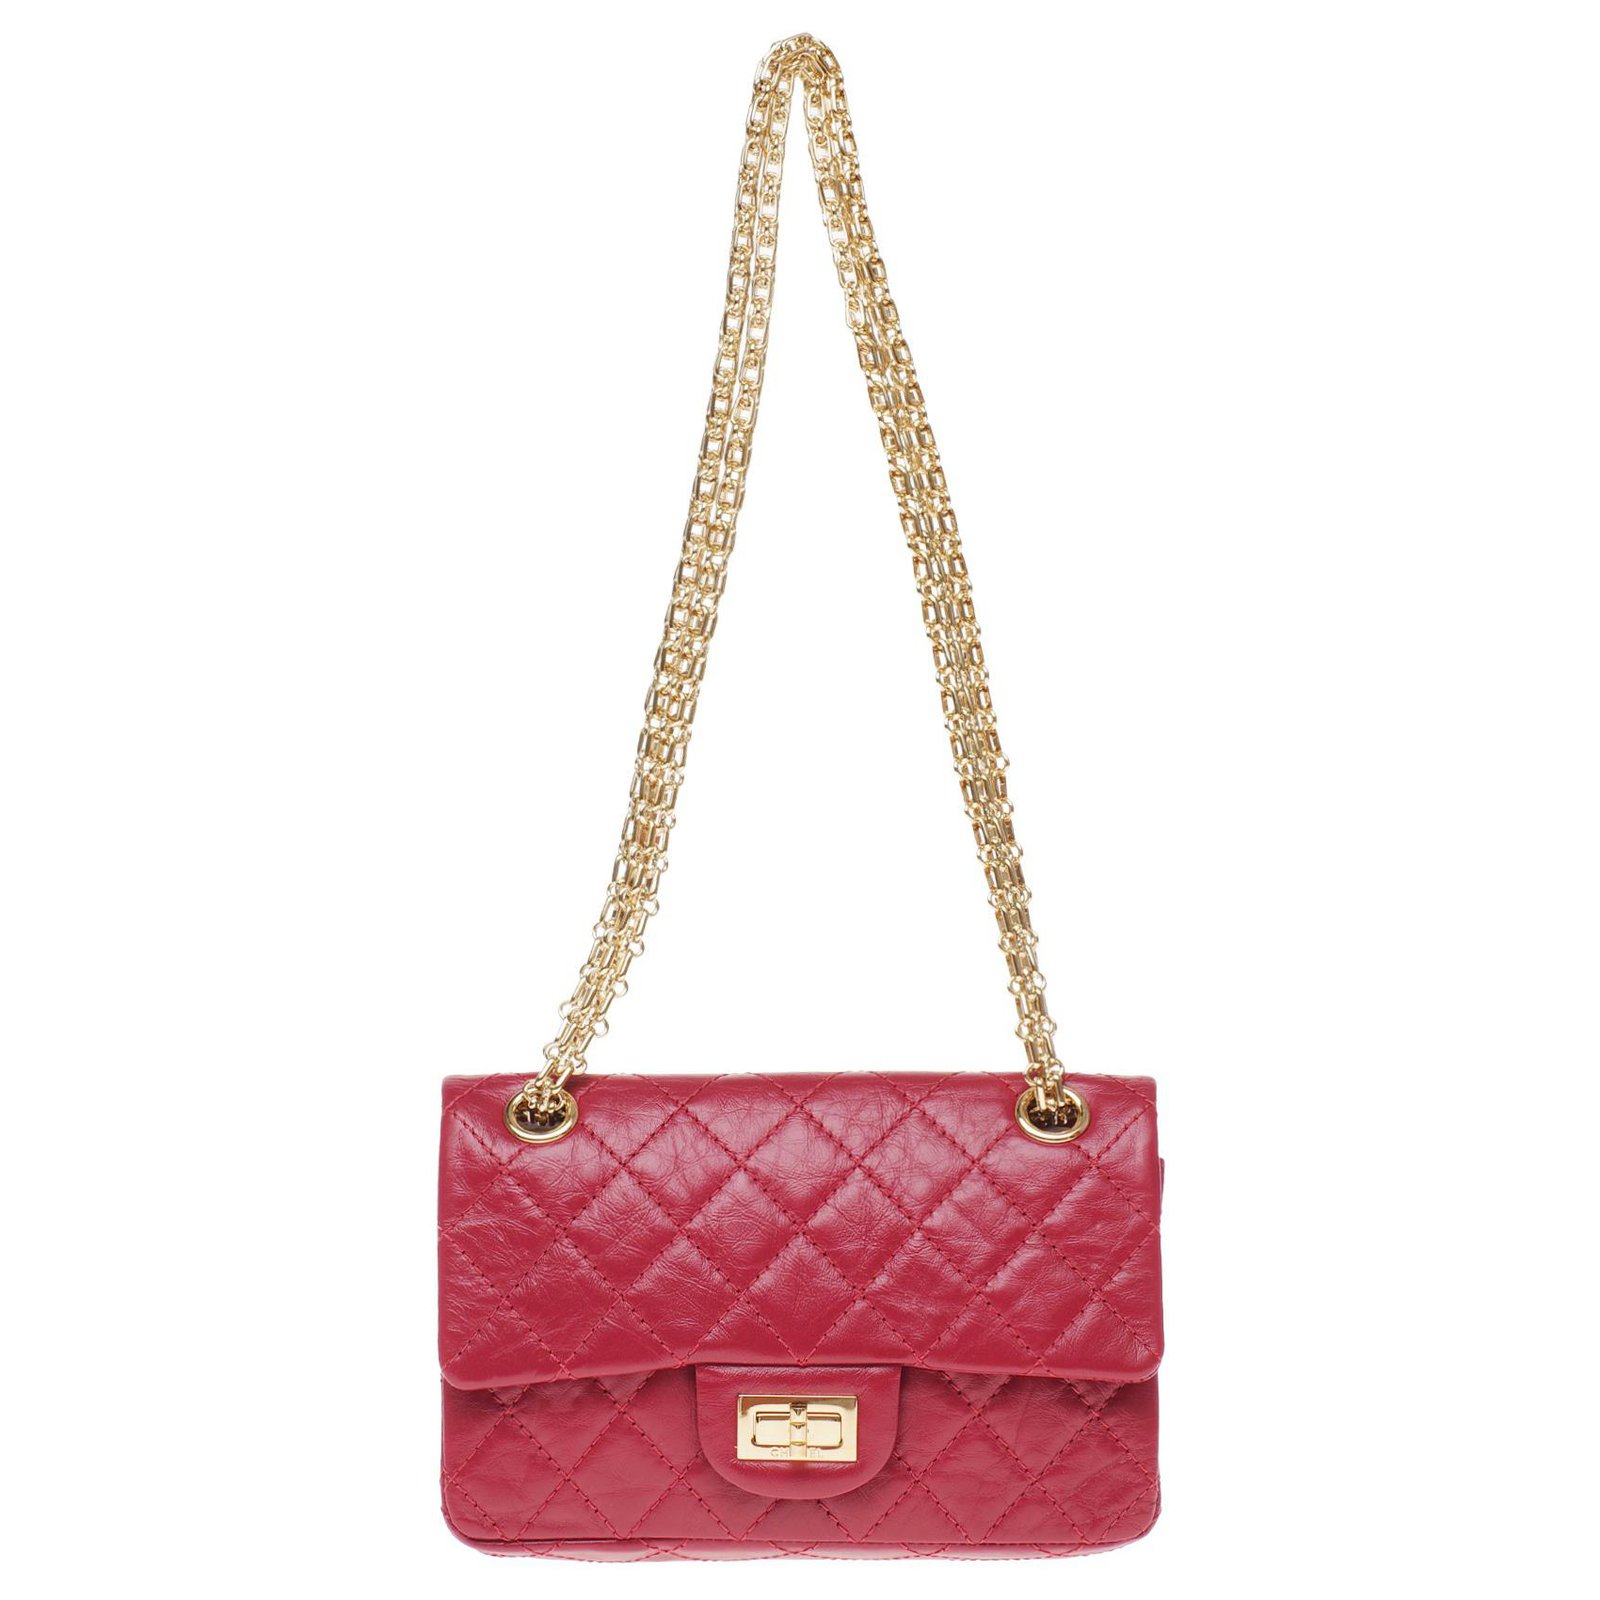 Mini Chanel bag  Reissue in red quilted leather, Golden Jewelery,  exceptional condition!  - Joli Closet